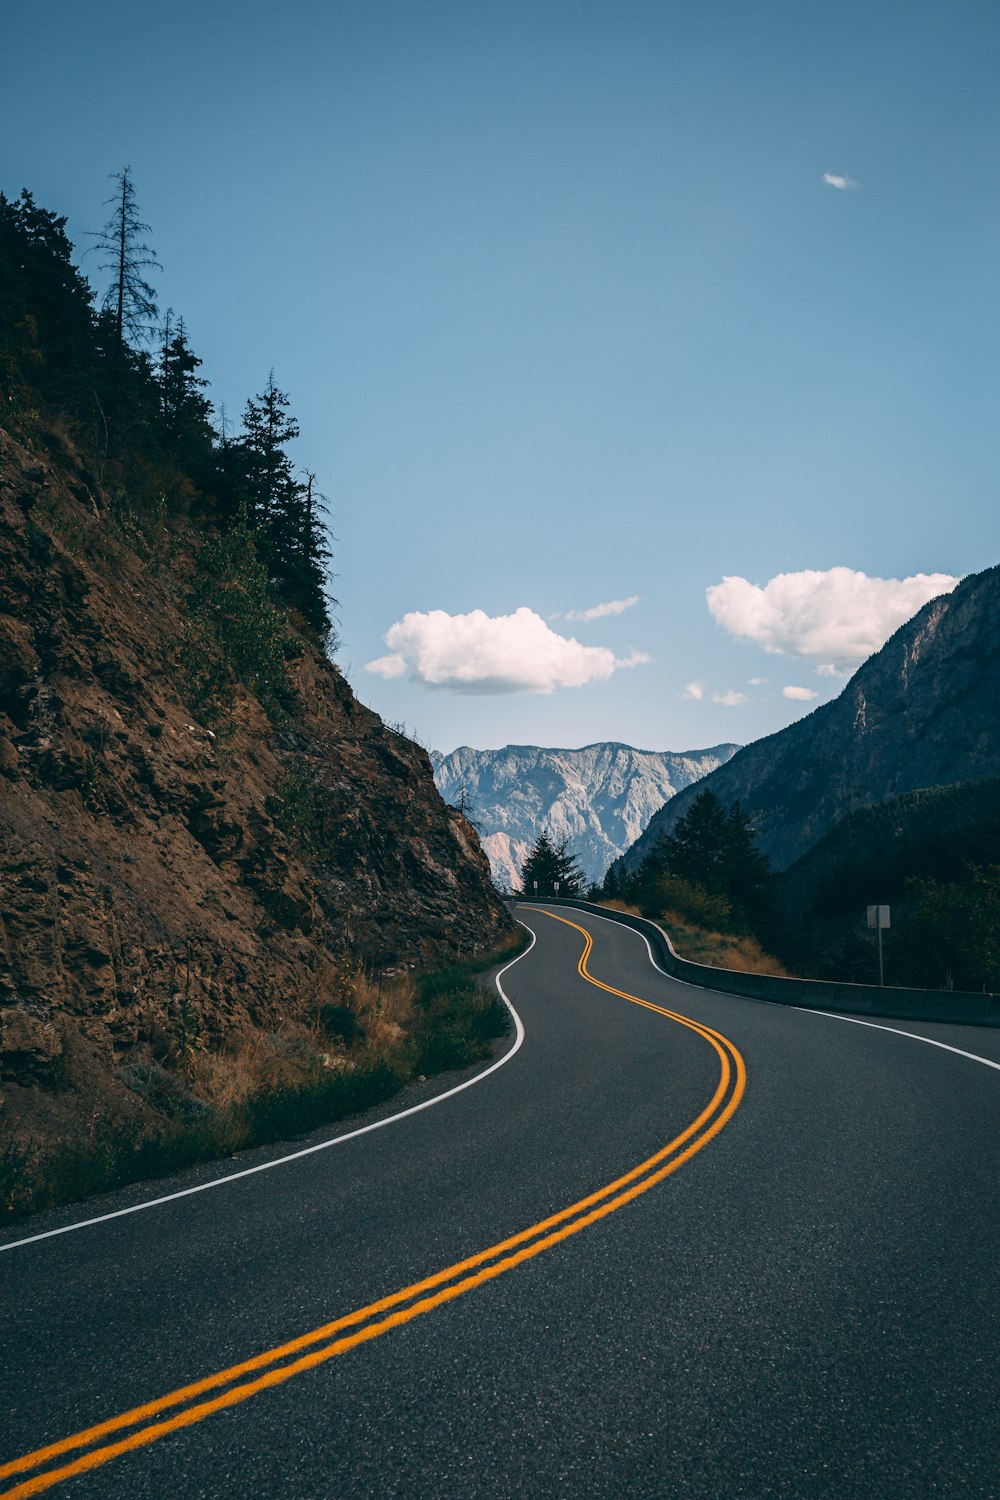 500+ Mountain Road Pictures [Stunning!] | Download Free Images on ...